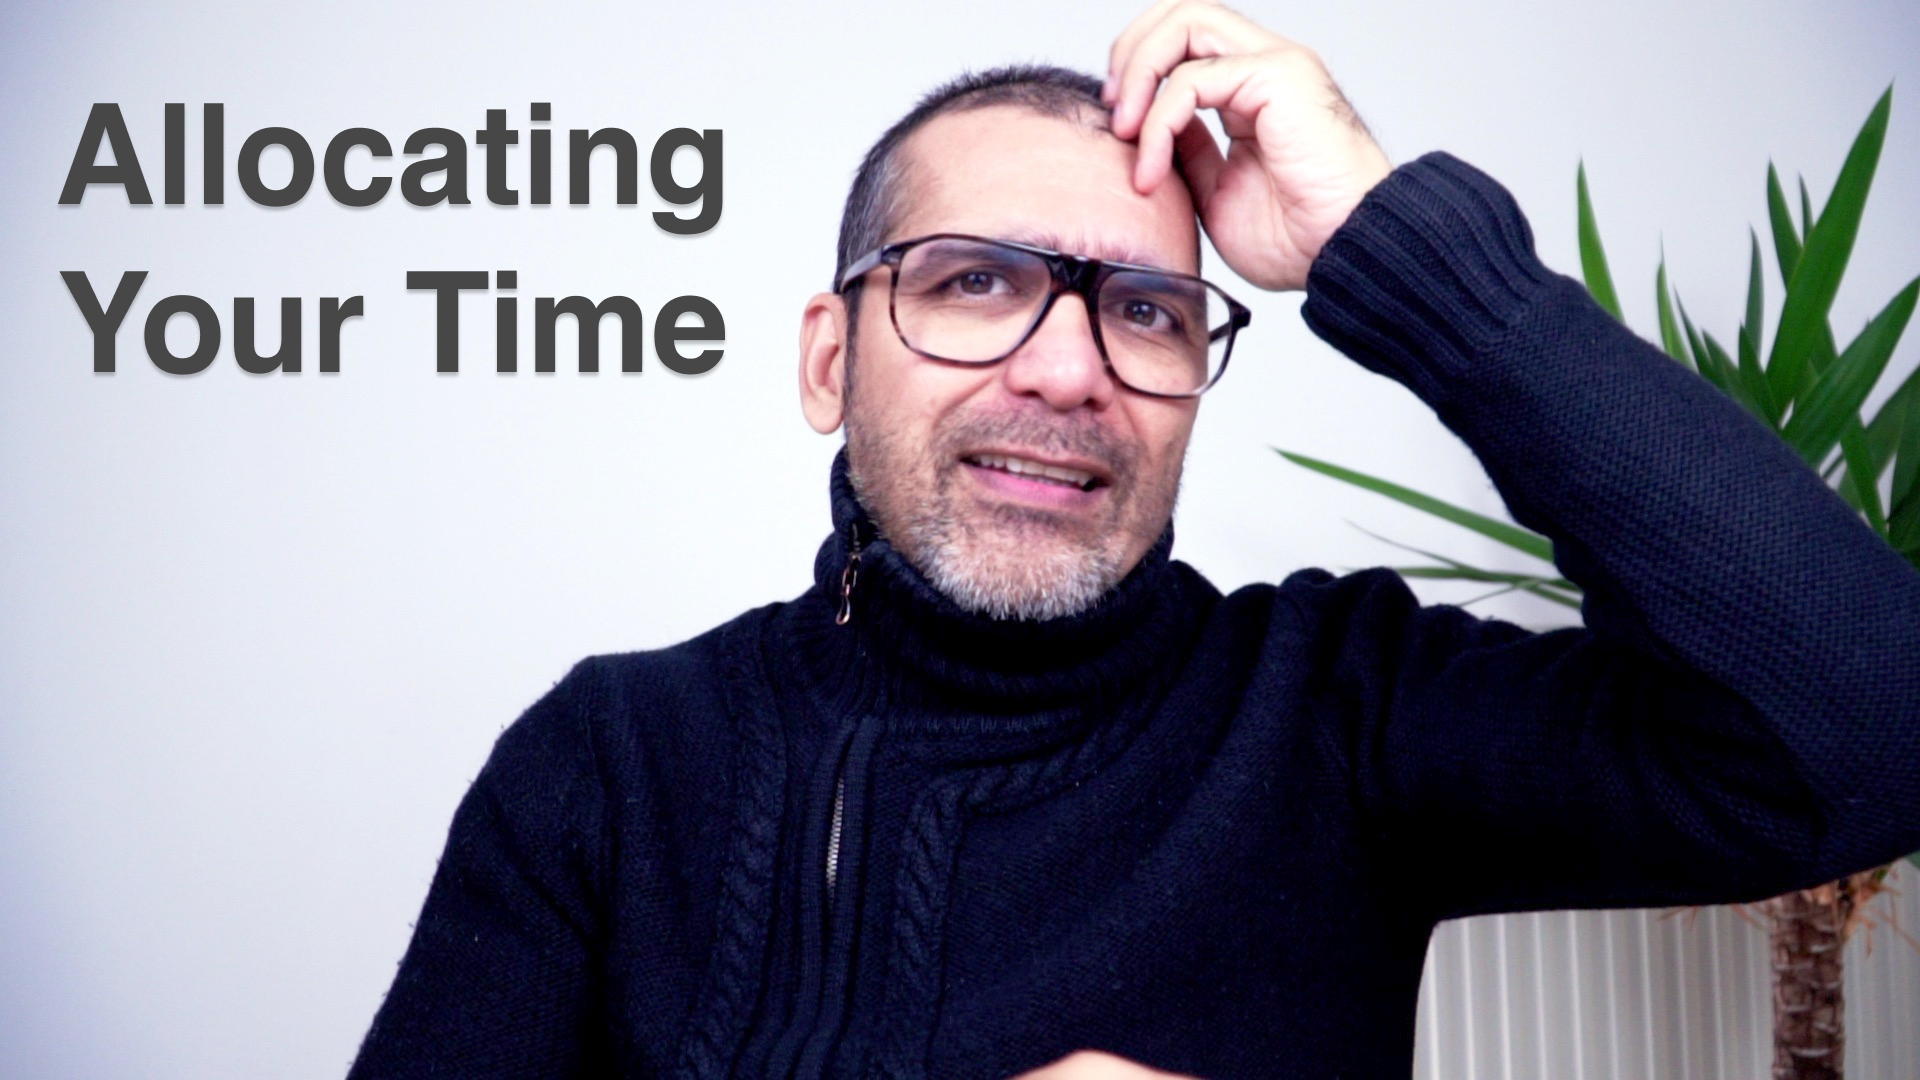 Create more time by allocating it better